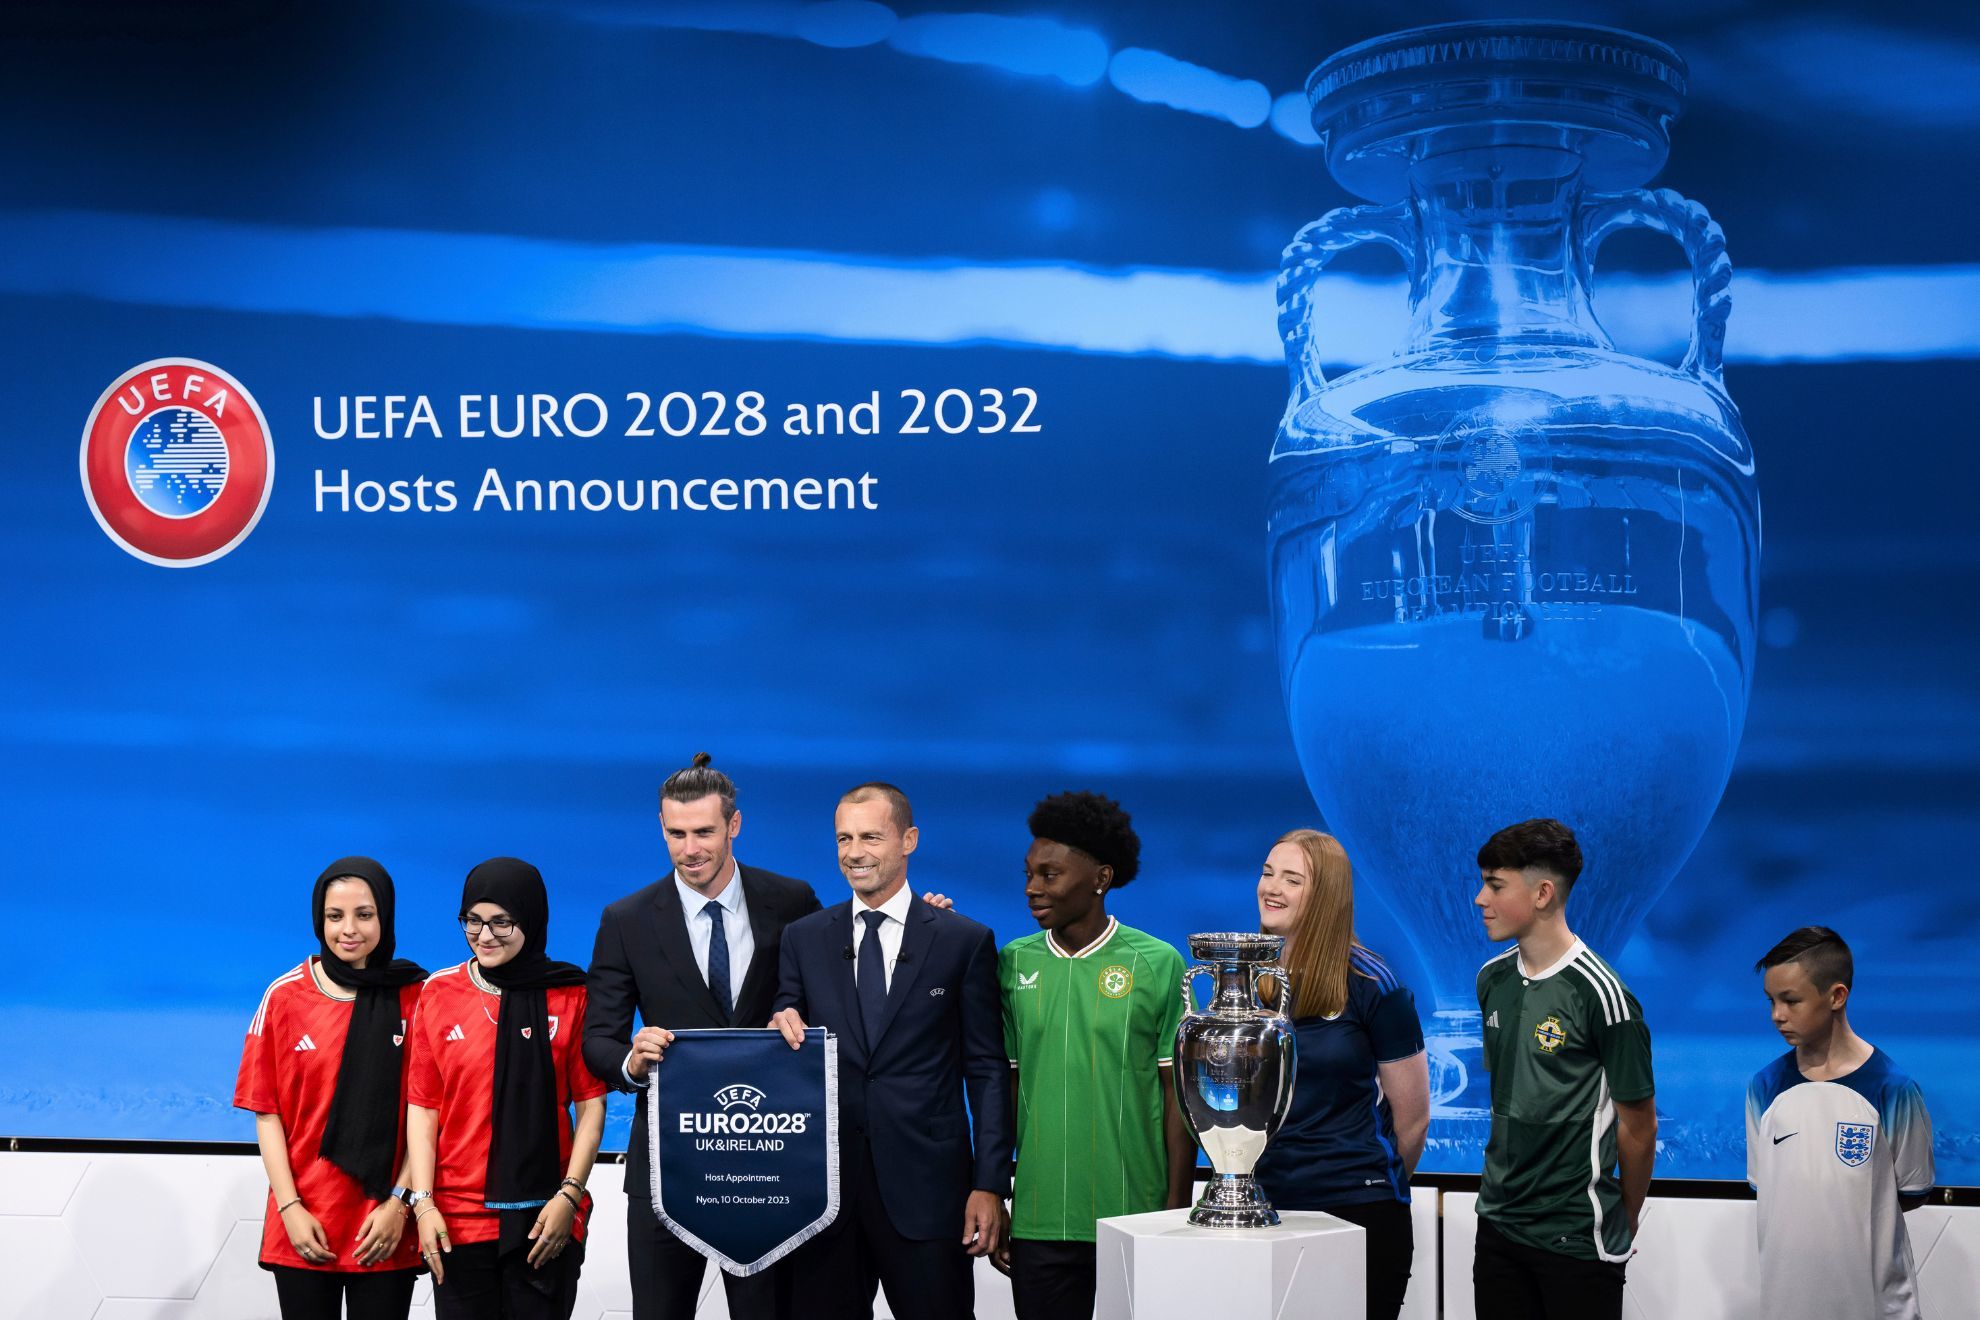 UEFA has decided the future of soccer's European Championship for the next decade